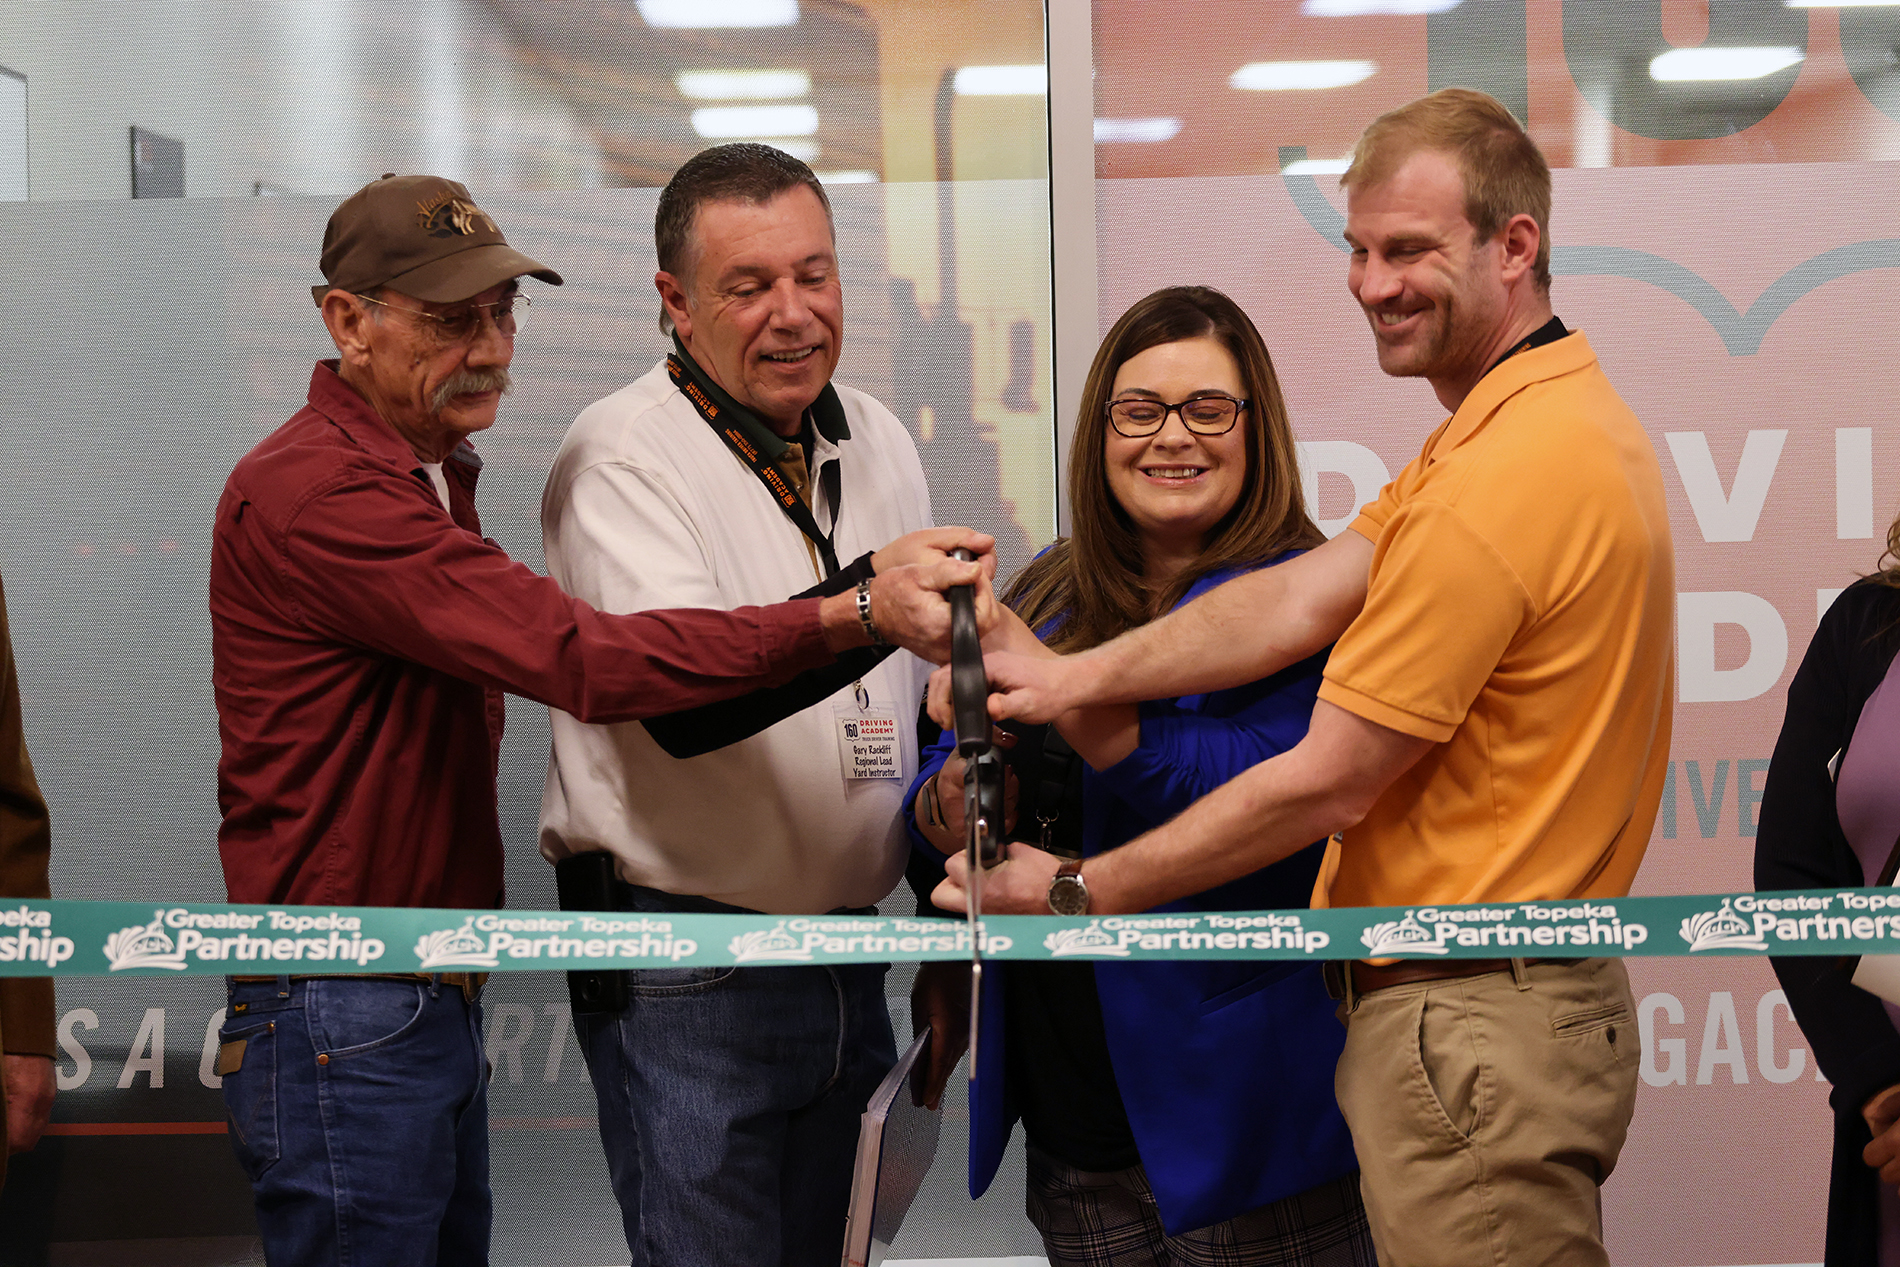 Today we celebrated the opening of 160 Driving Academy’s Topeka location with a ribbon cutting! 160 Driving Academy specializes in helping drivers earn their Commercial Driver’s License (CDL). They are located at Fairlawn Plaza, so go pay them a visit!